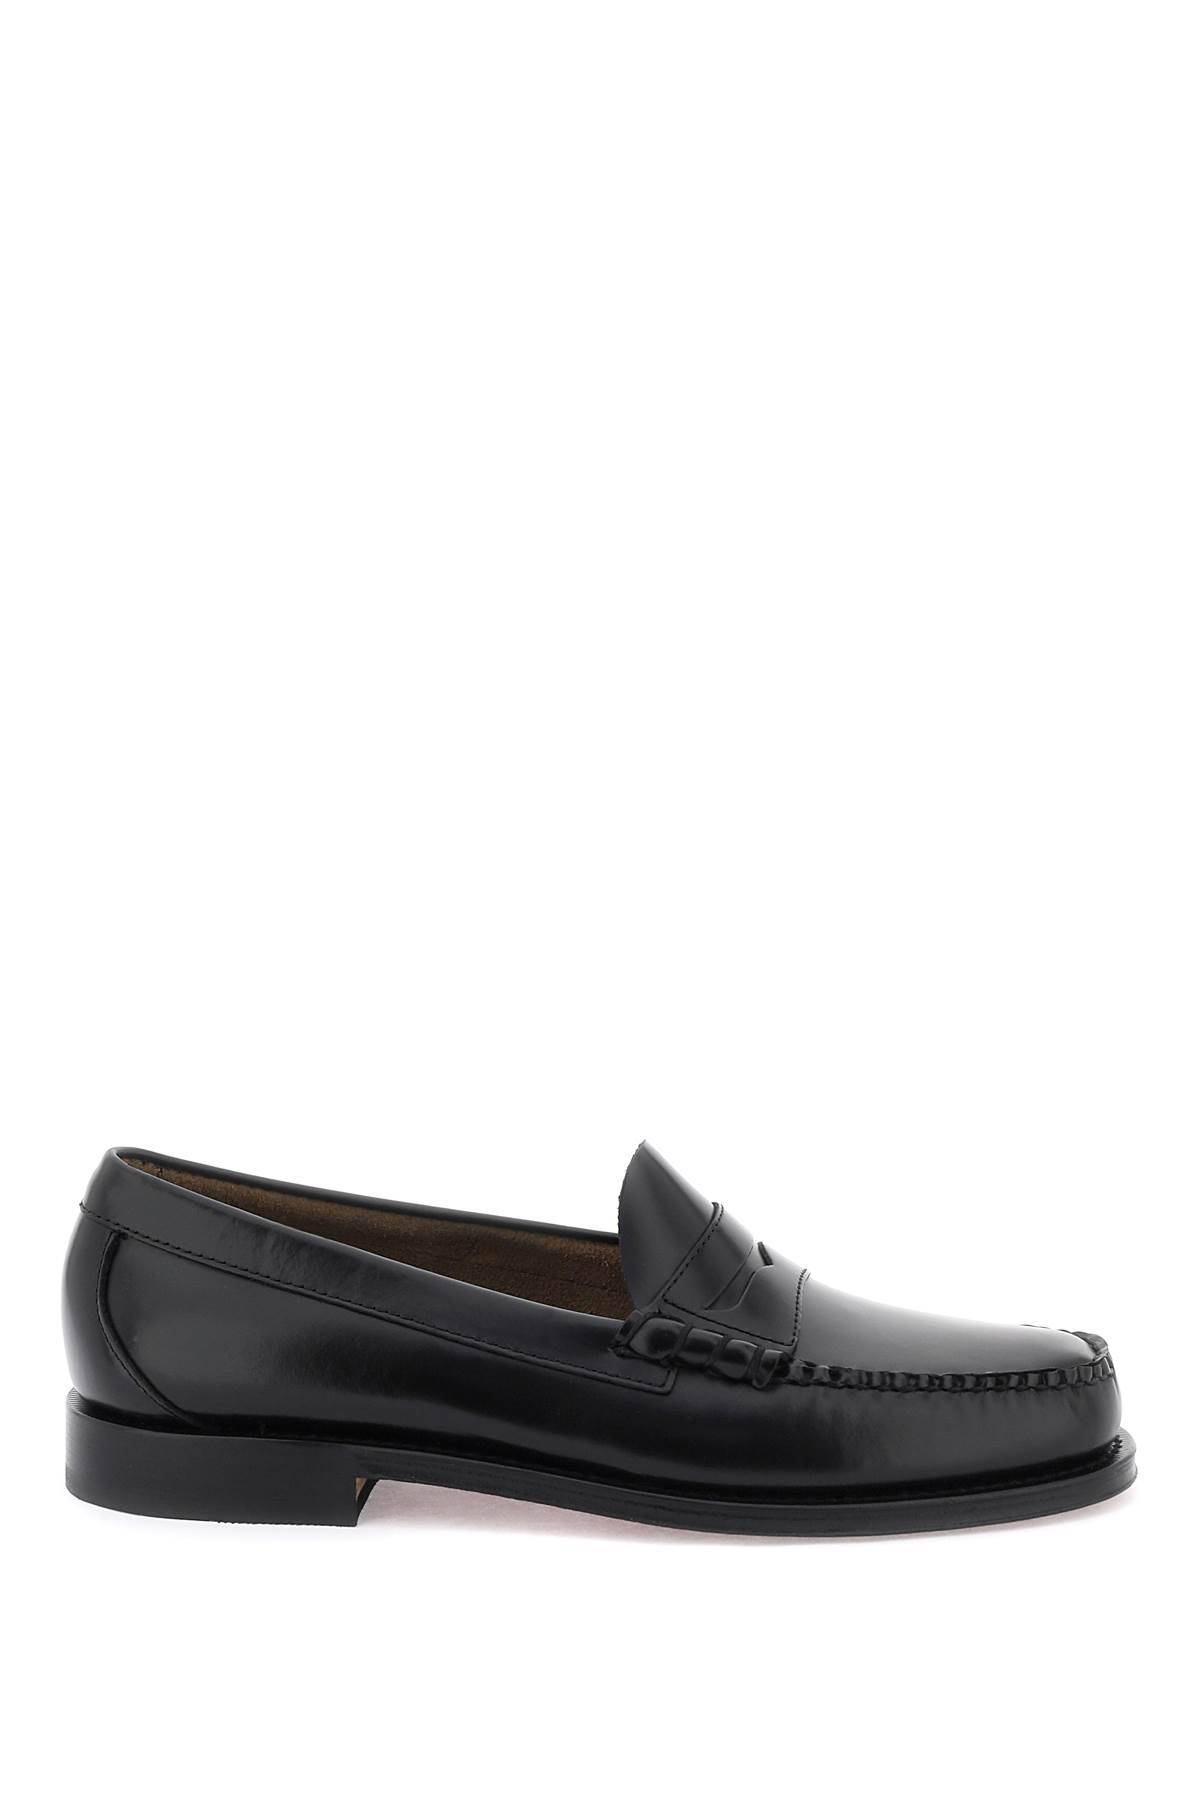 G.H. BASS G. H. BASS 'weejuns larson' penny loafers